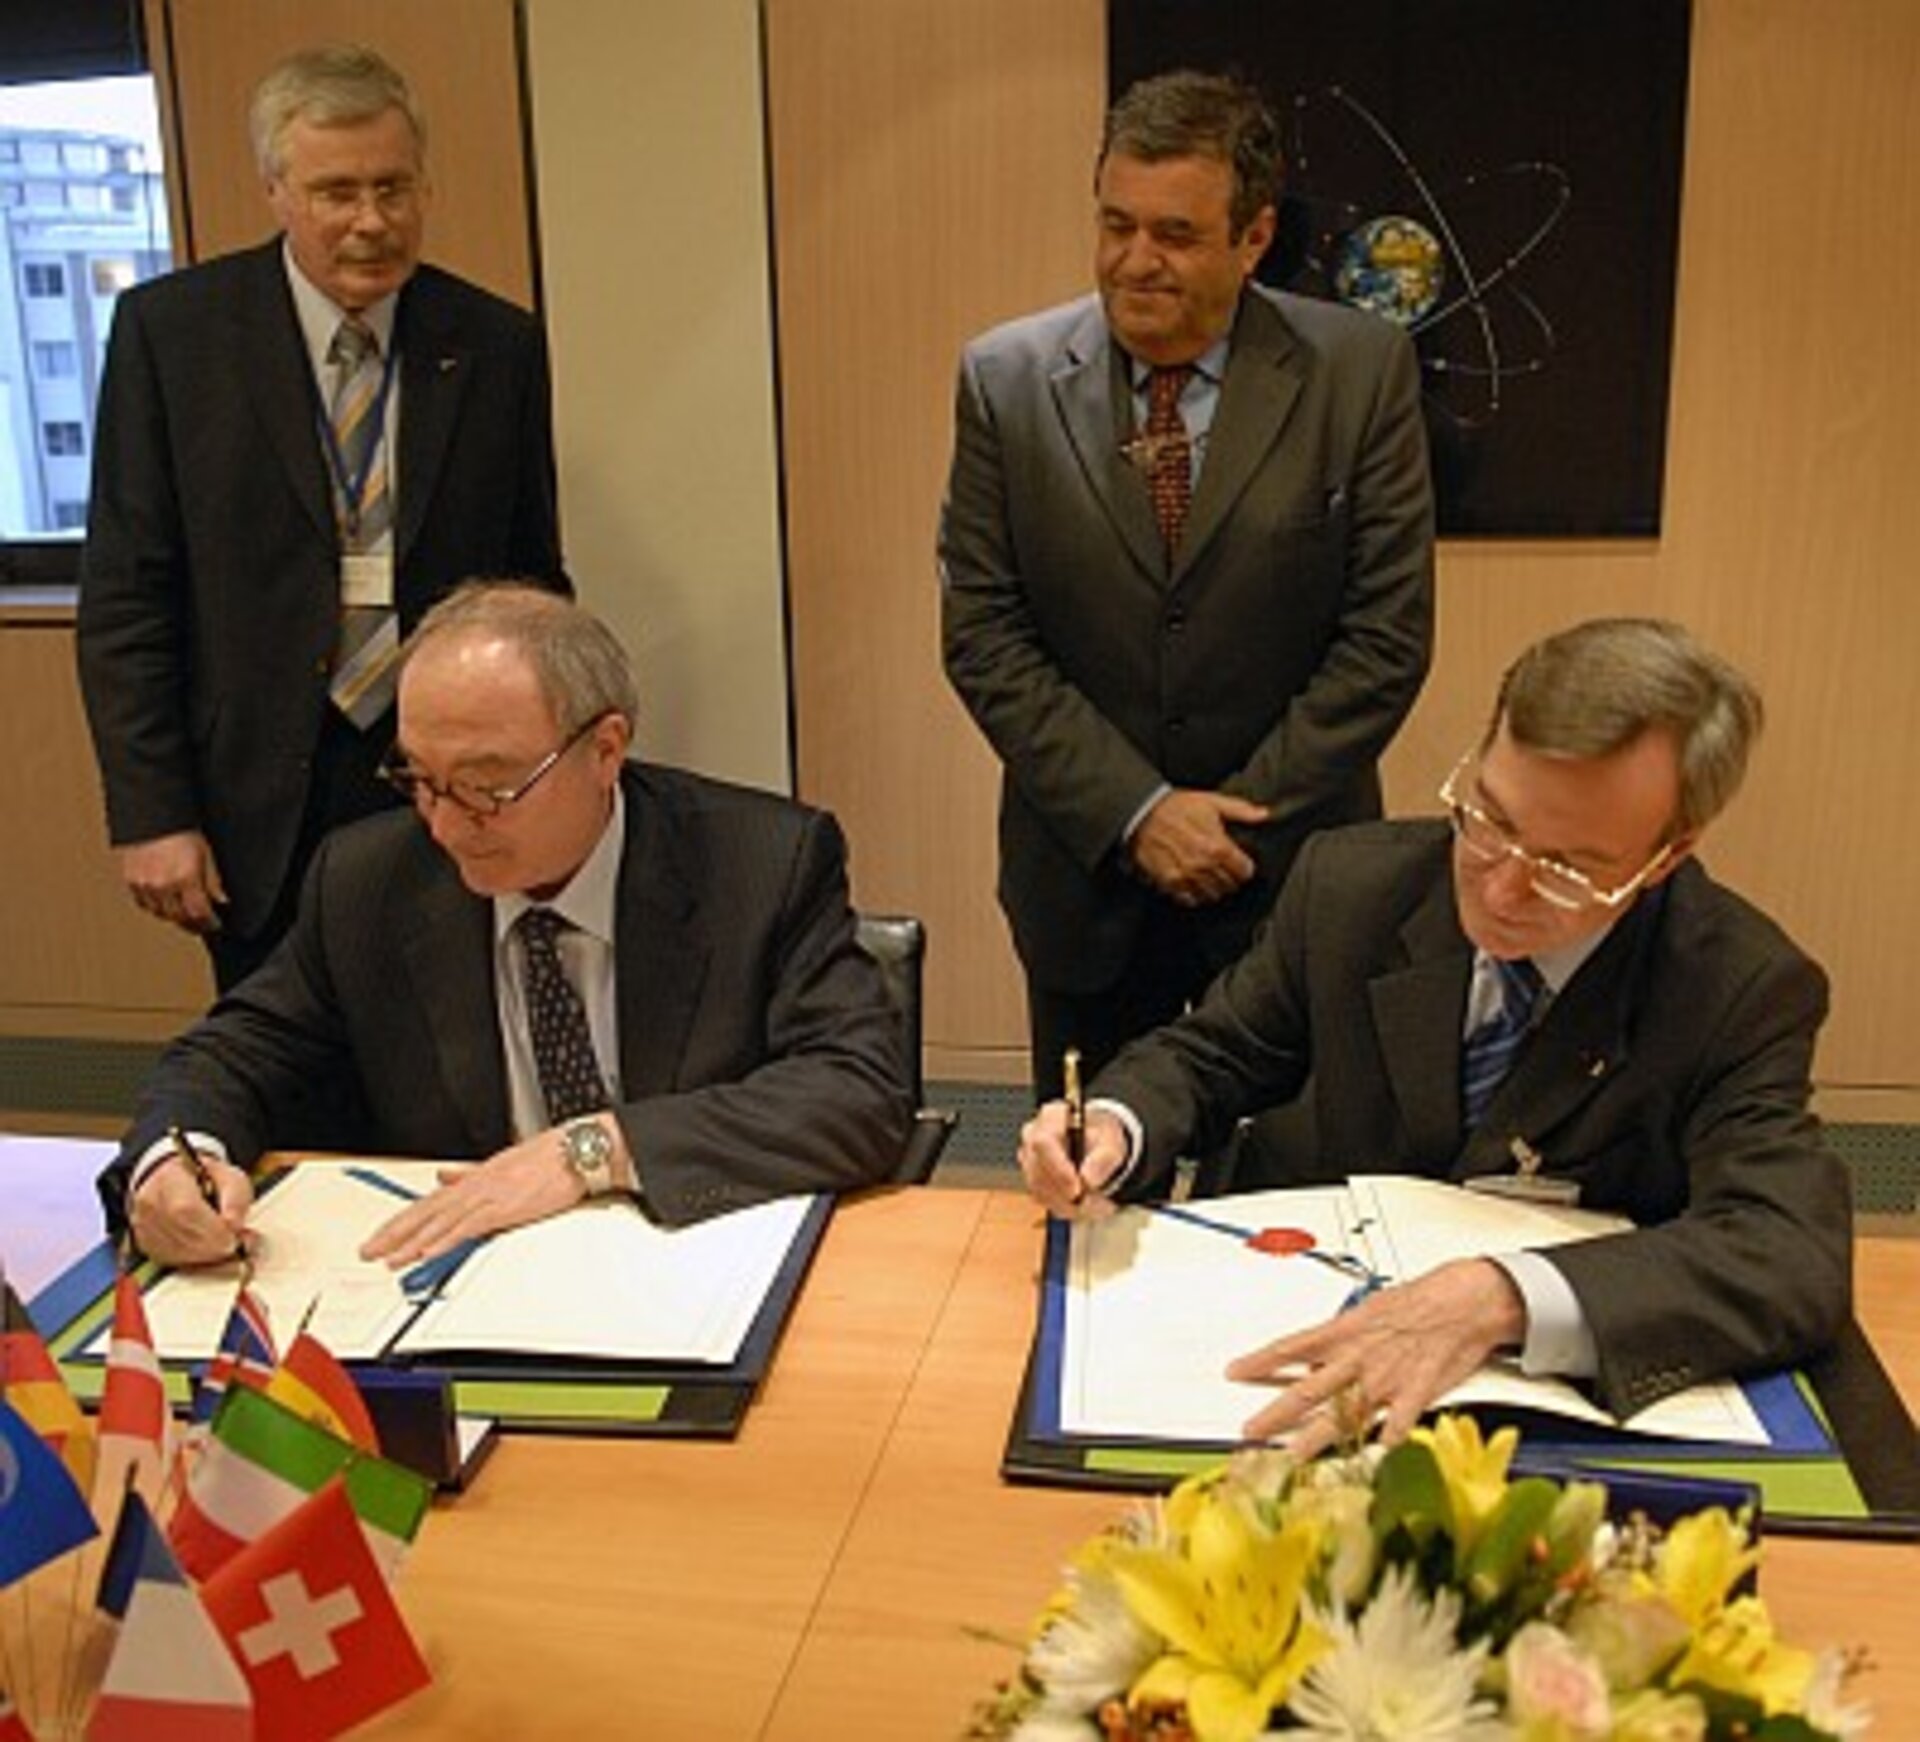 Signing of the Alphabus co-operation agreement